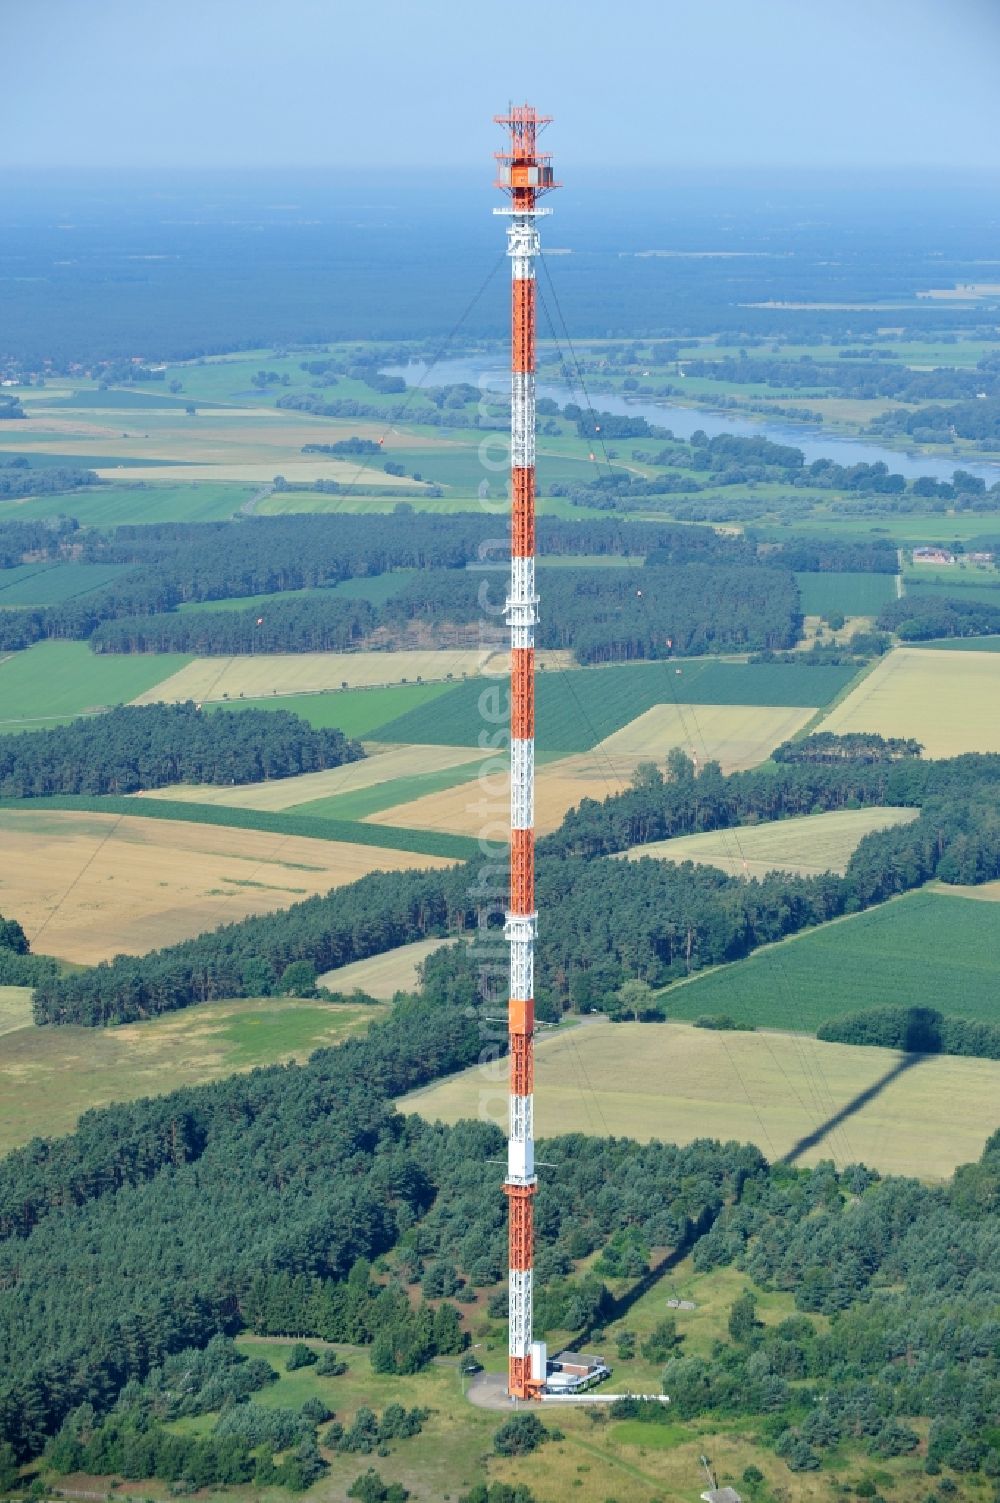 Aerial photograph Dannenberg - The radio tower at Höhbeck Dannenberg in Lower Saxony